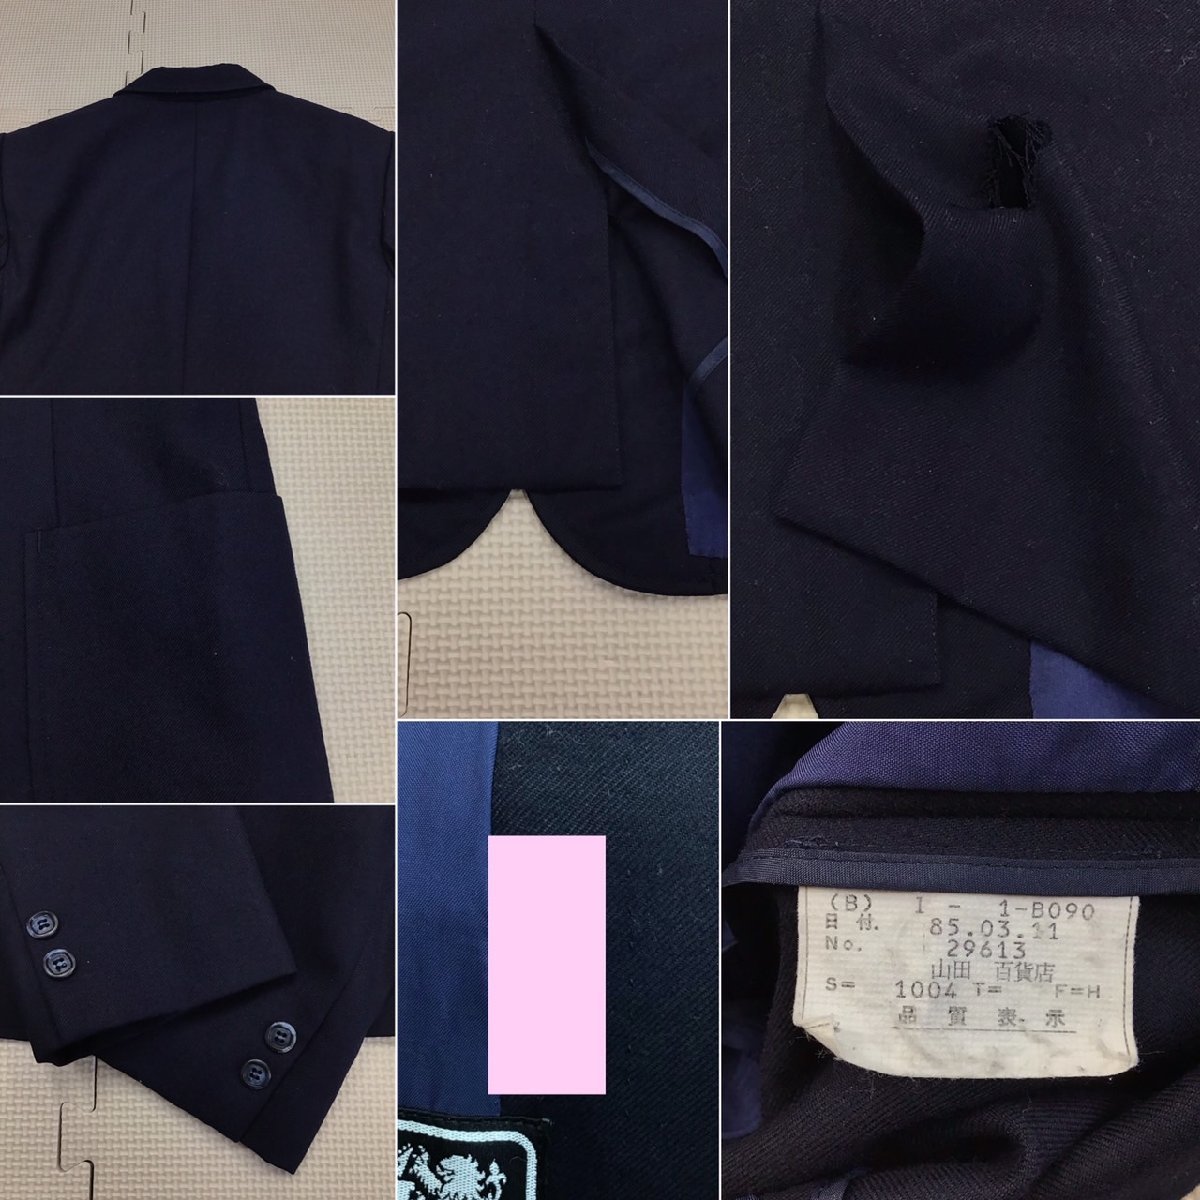 O112/Y( used ) Fukushima direction woman uniform 3 point /. name unknown /M/W66/ height 56/ blaser / blouse / skirt /YAMADA/ check pattern / navy blue / winter clothes / middle ./ high school / school uniform 